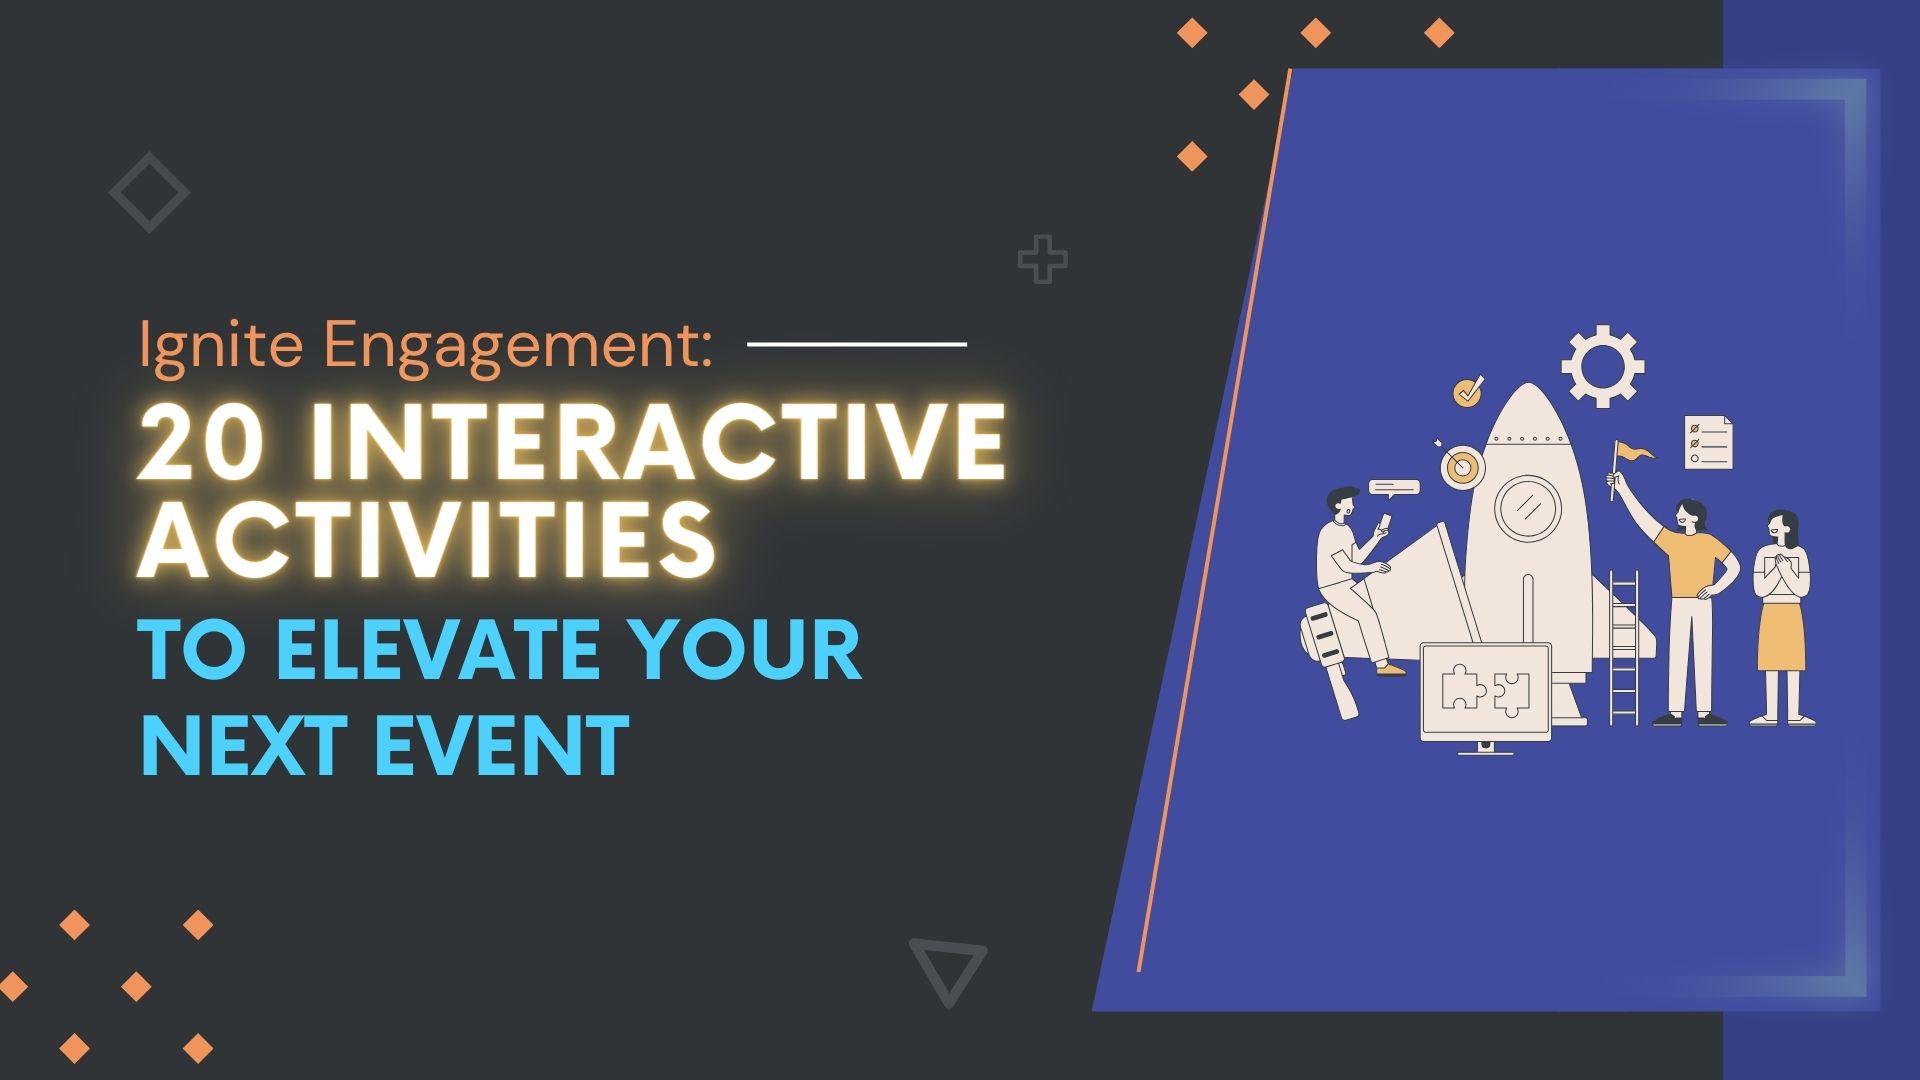 Ignite Engagement: 20 Interactive Activities to Elevate Your Next Event